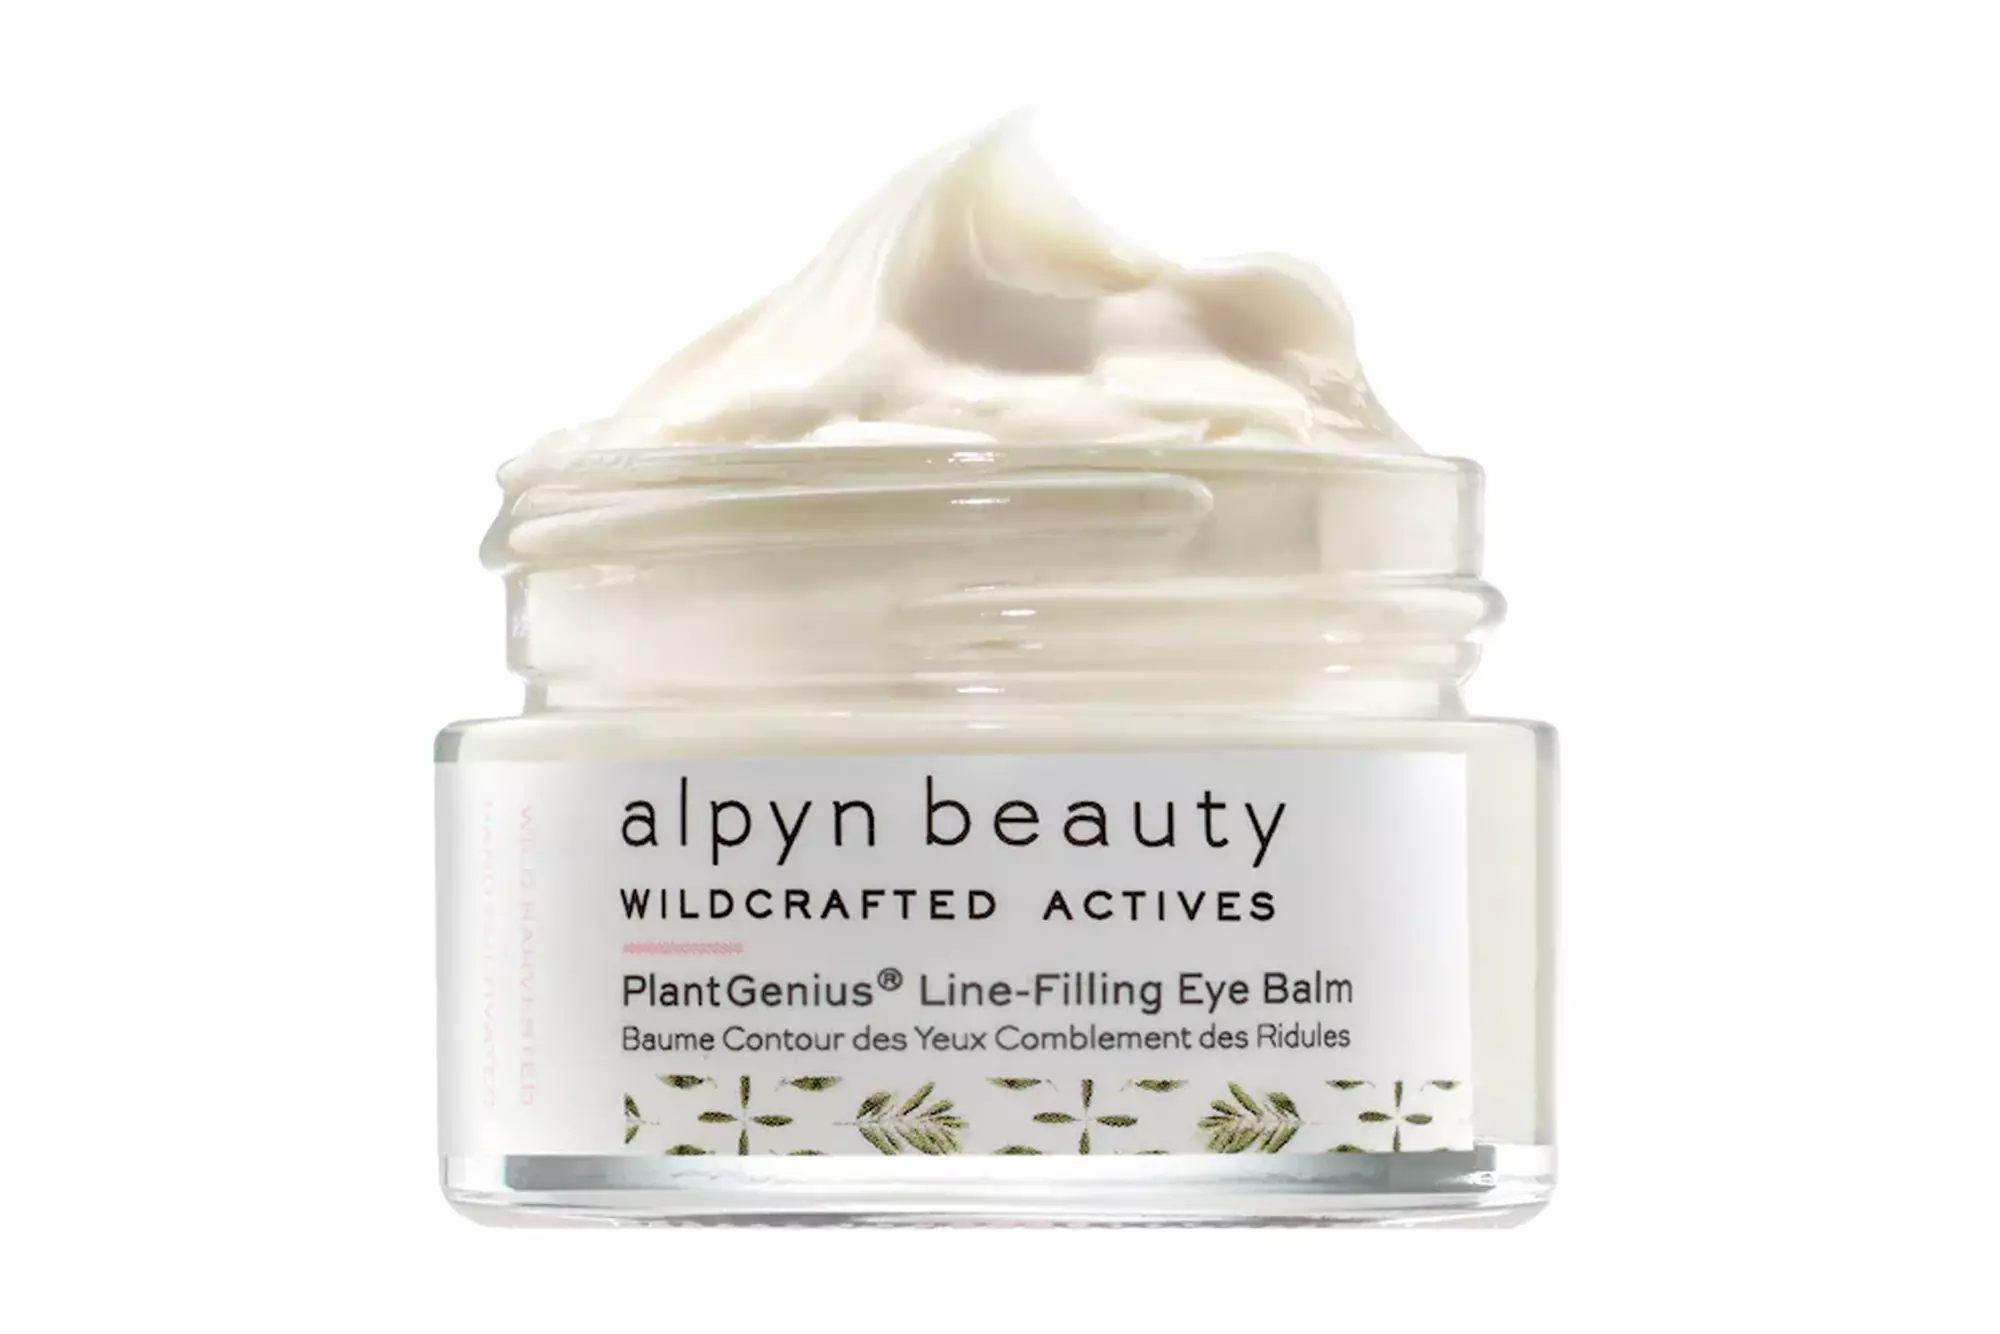 alpyn  <a href='https://shopmrkatin.vn/c/beauty' title='beauty' class='hover-show-link replace-link-36'>beauty<span class='hover-show-content'></span></a>  PlantGenius Line-Filling Eye Balm